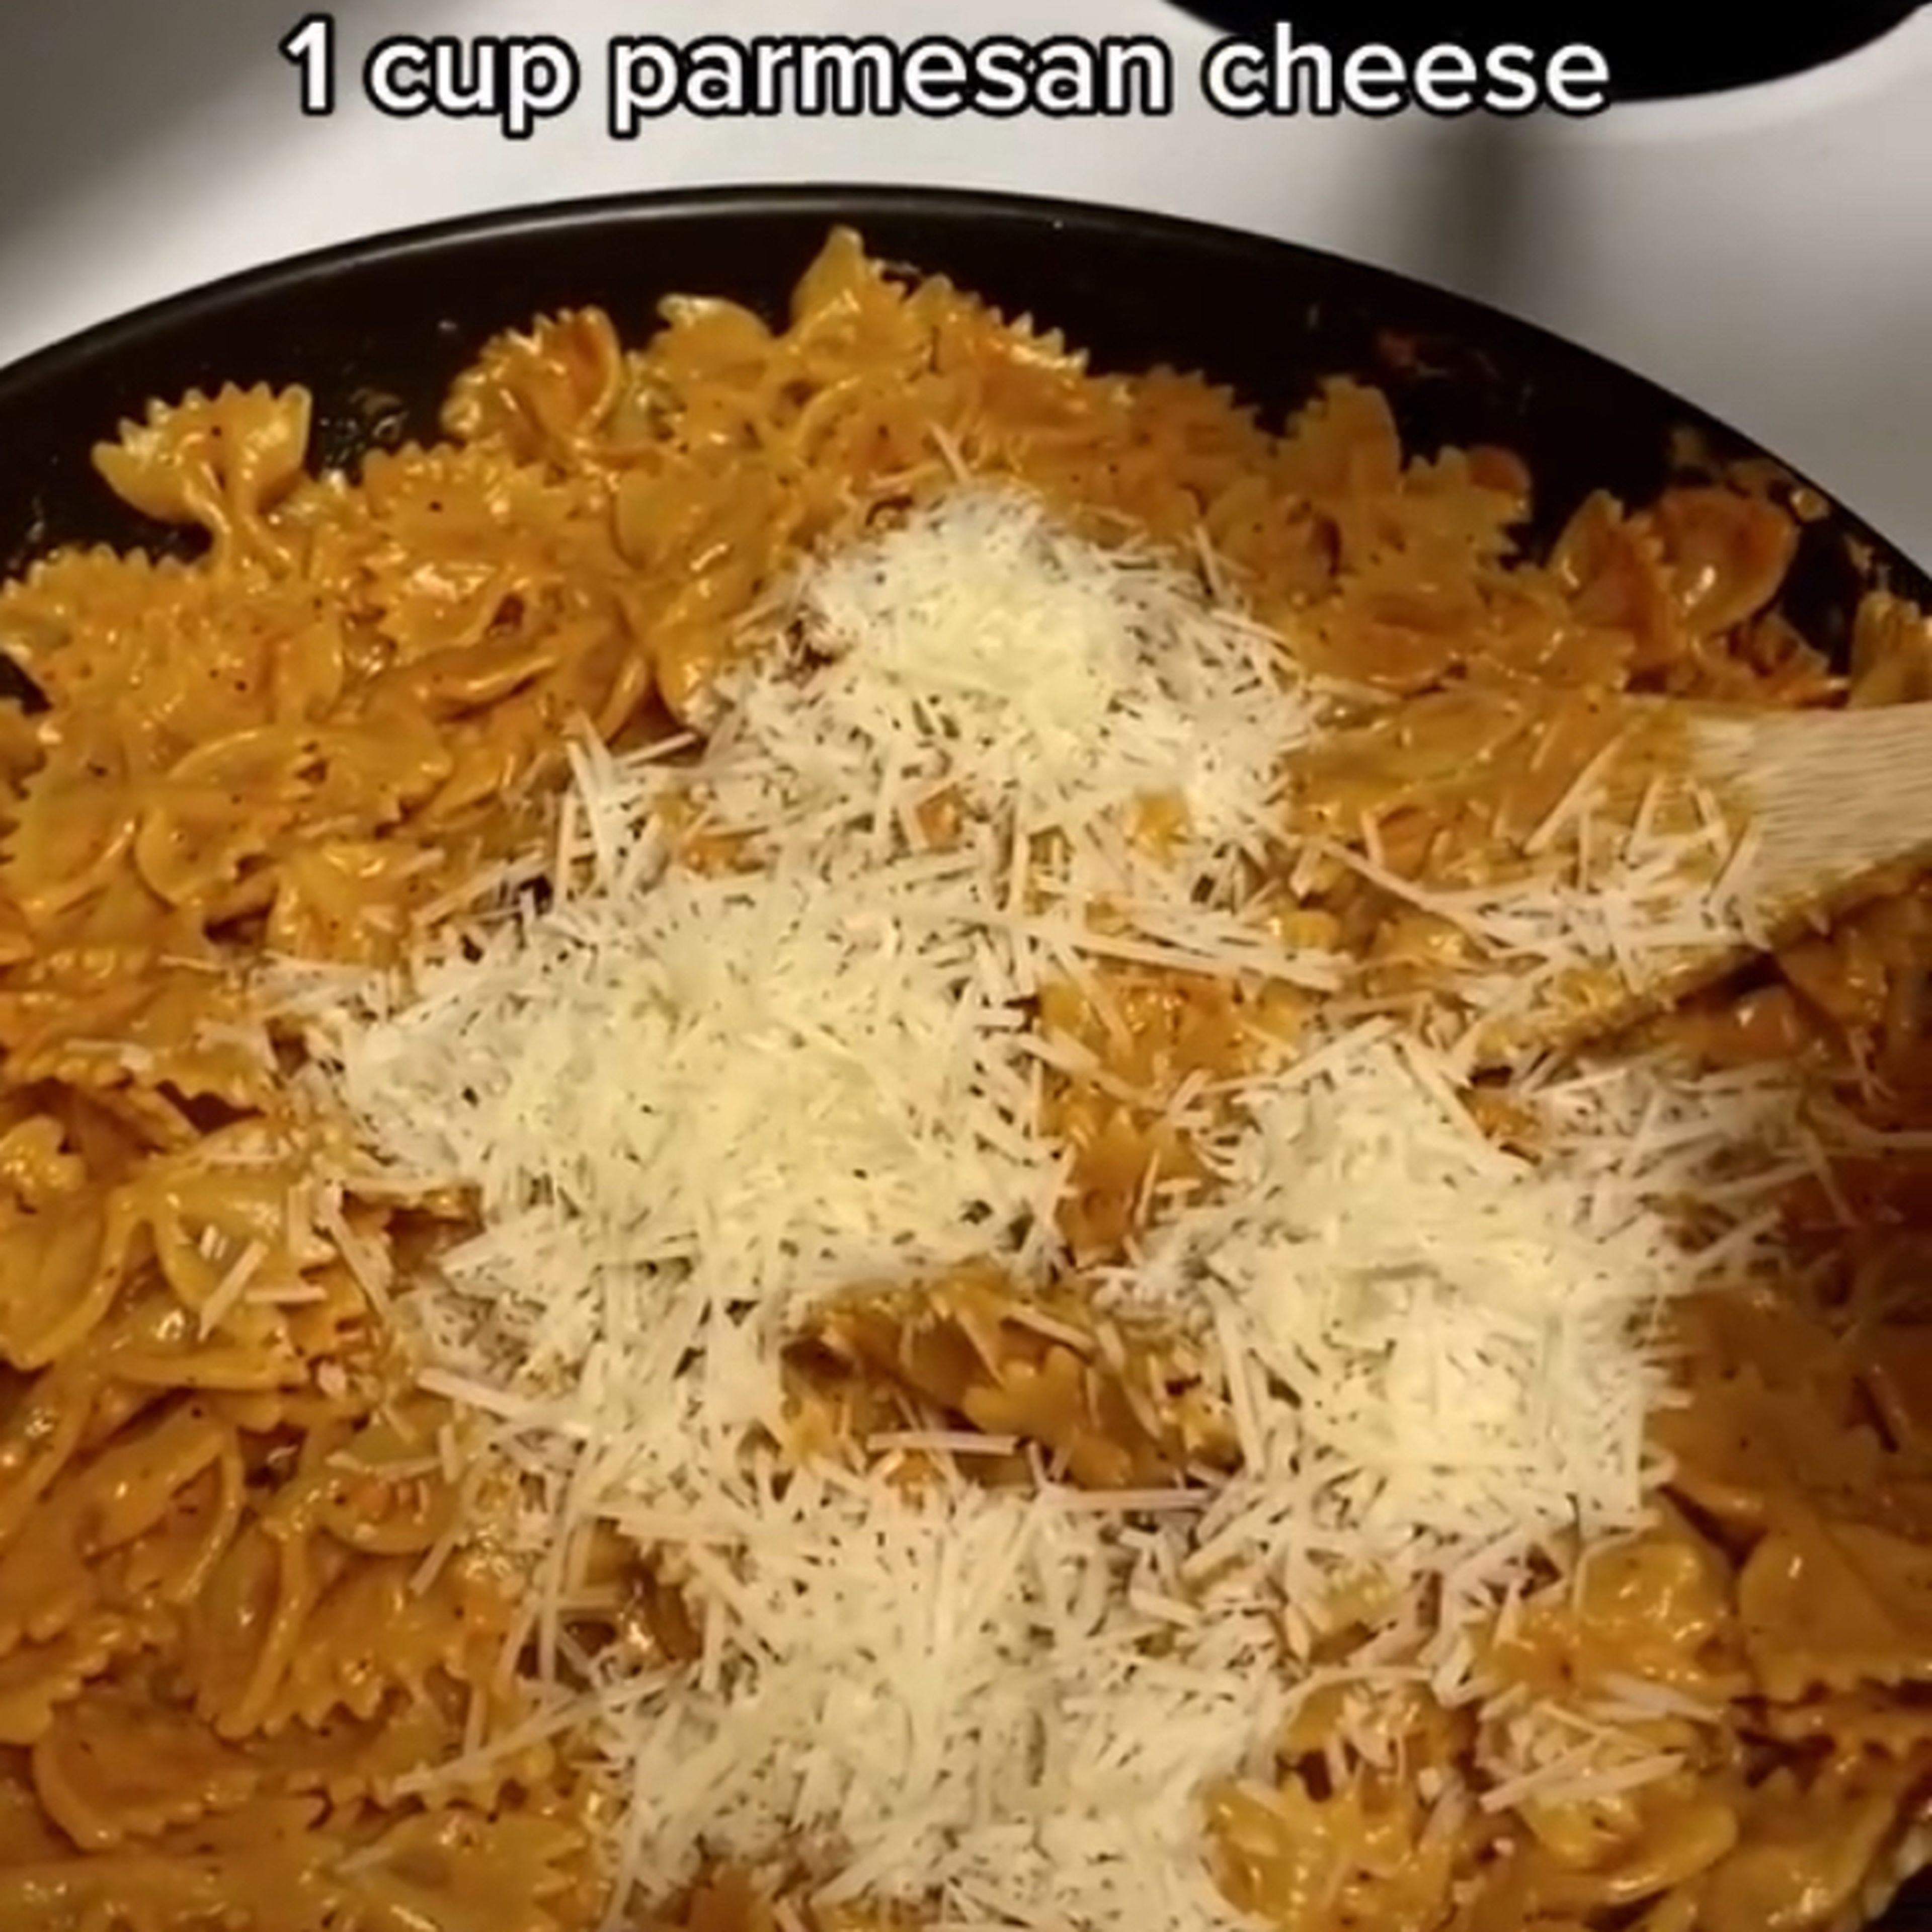 On top, put the parmesan cheese. And mix.